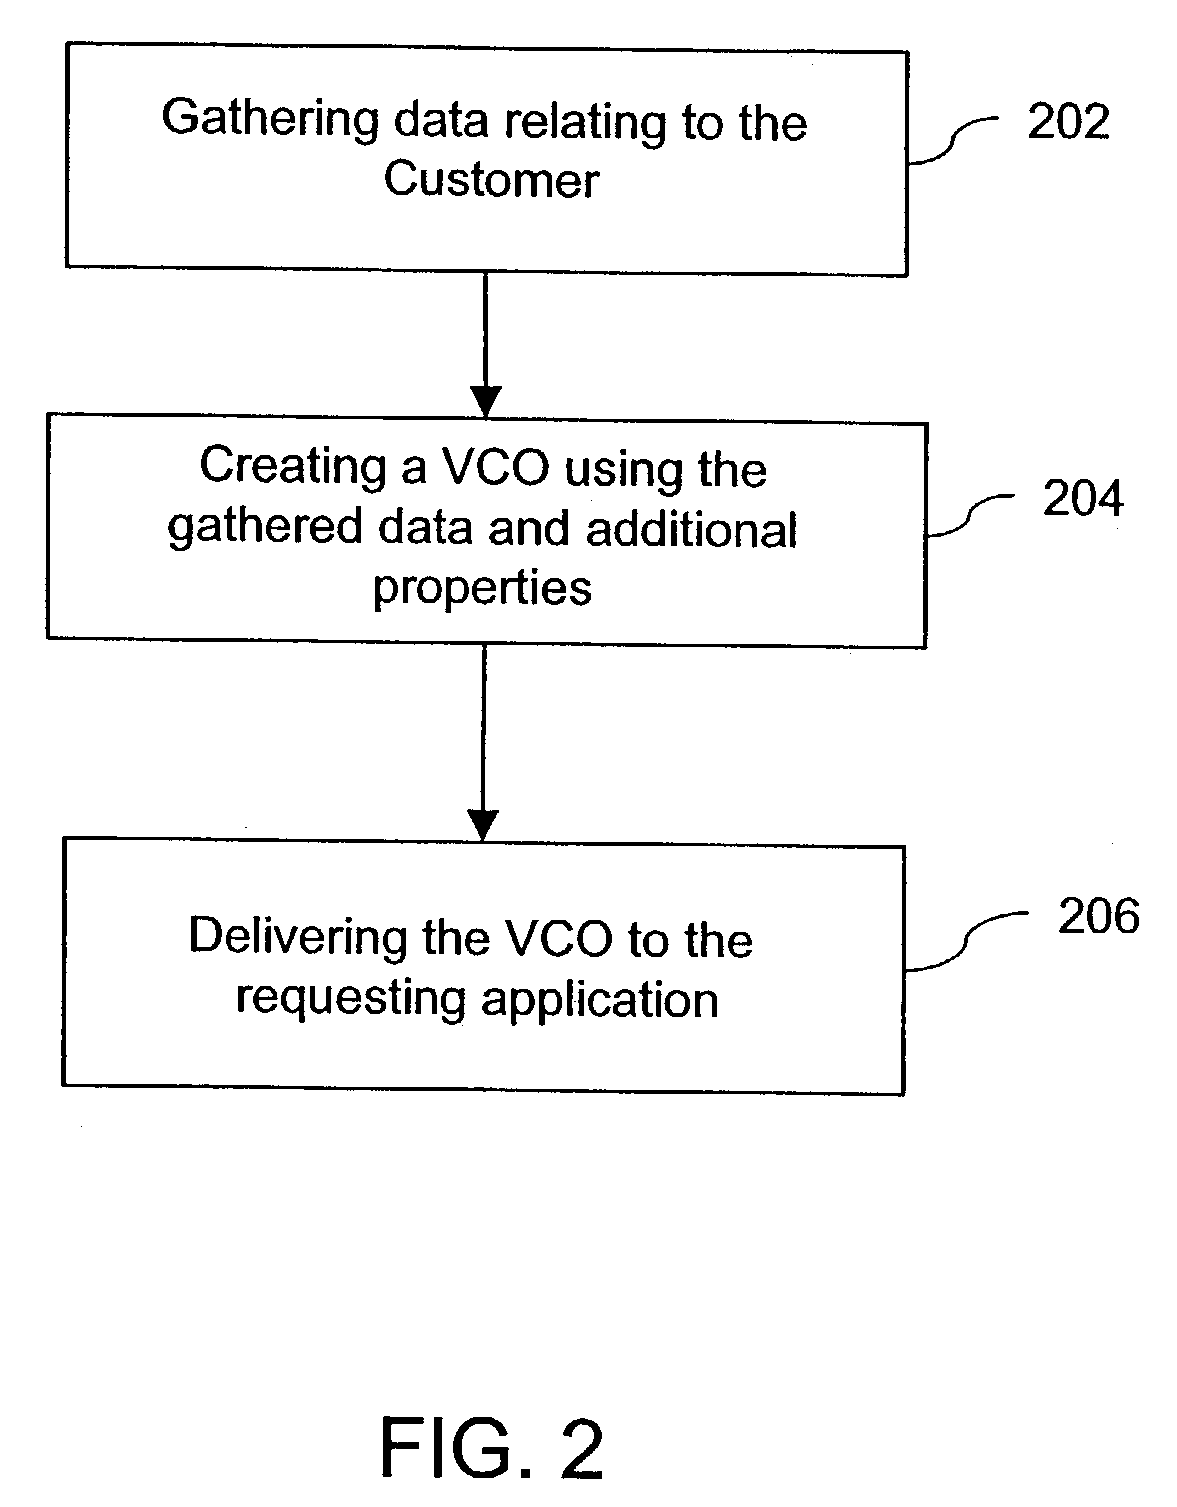 System and method for integrating, managing and coordinating customer activities